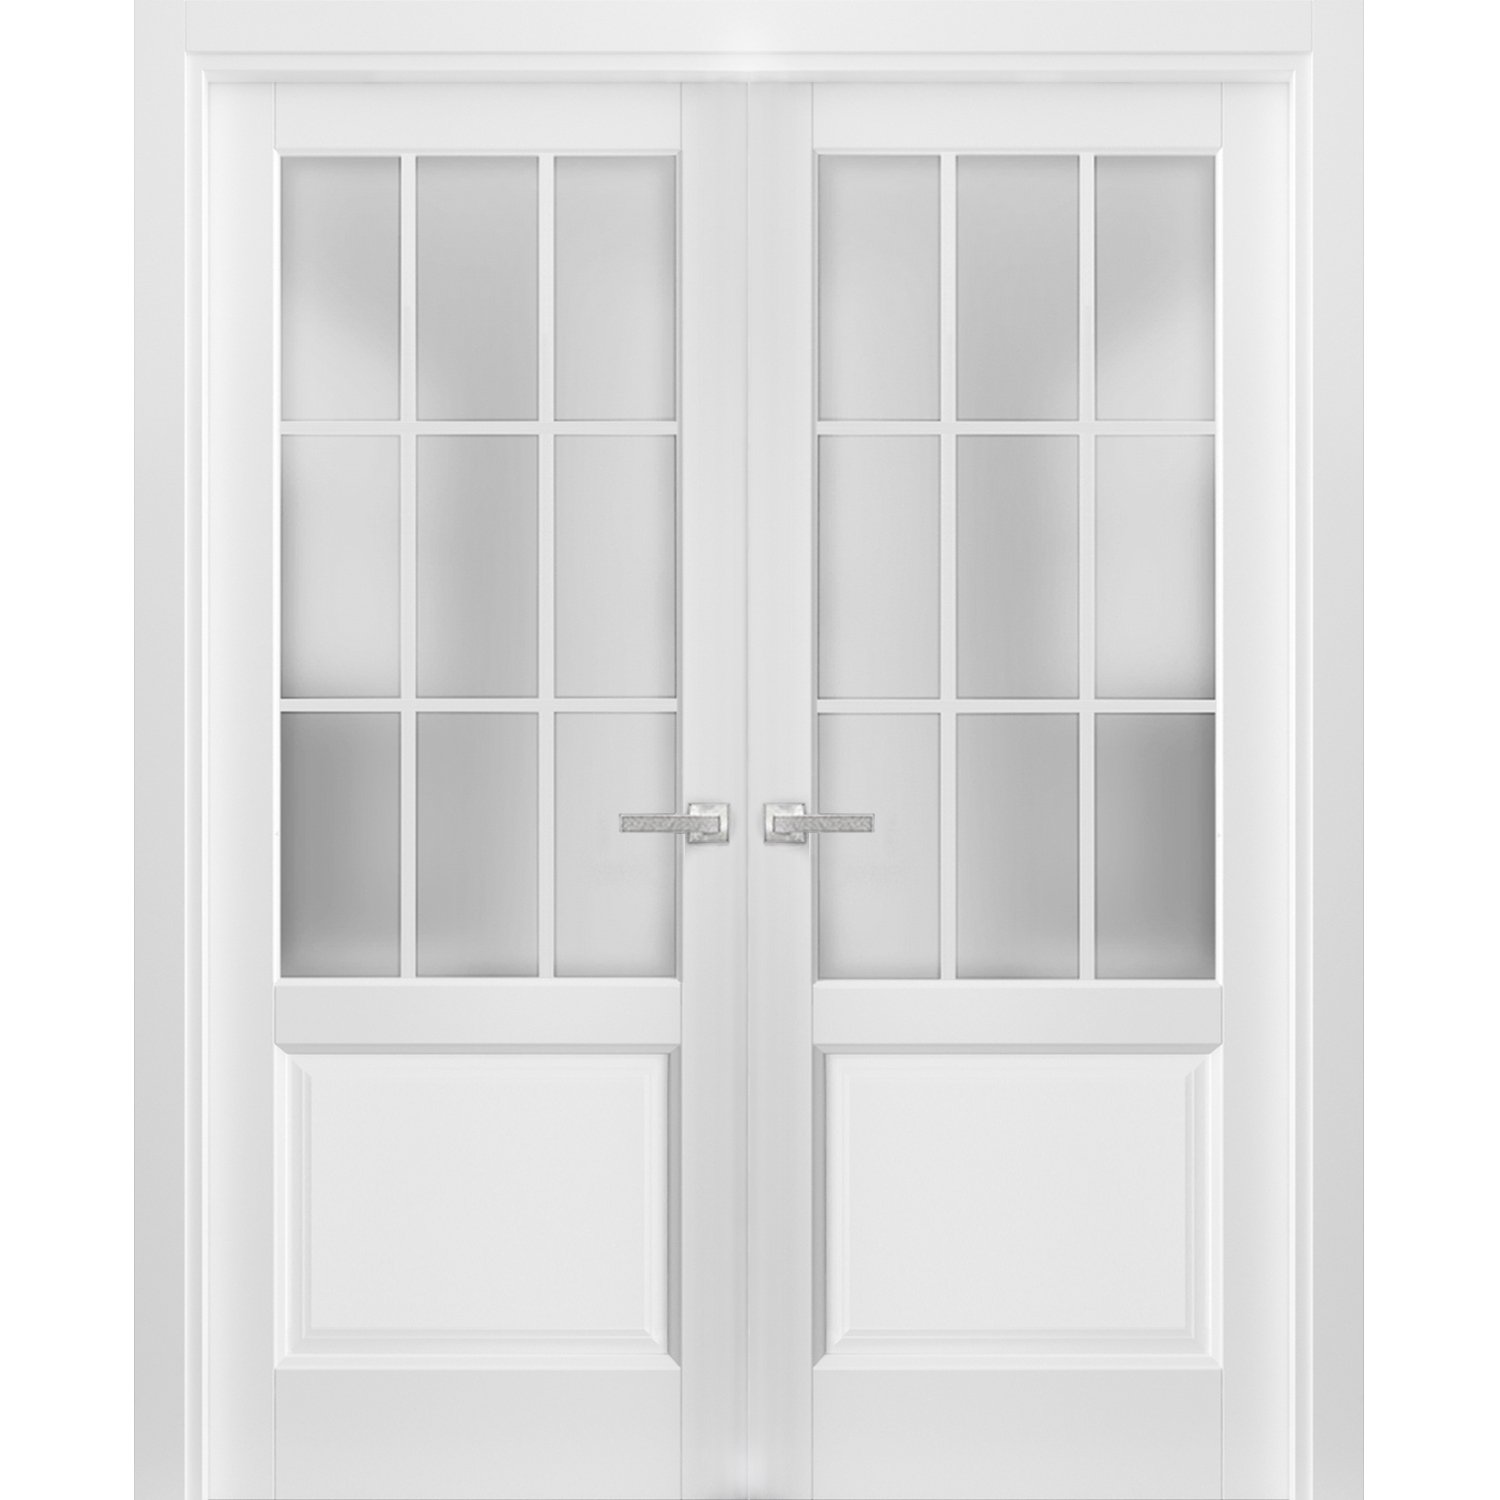 Solid French Double Doors Frosted Glass 9 Lites | Felicia 3309 Matte White | Single Regural Panel Frame Trims | Bathroom Bedroom Sturdy Doors 